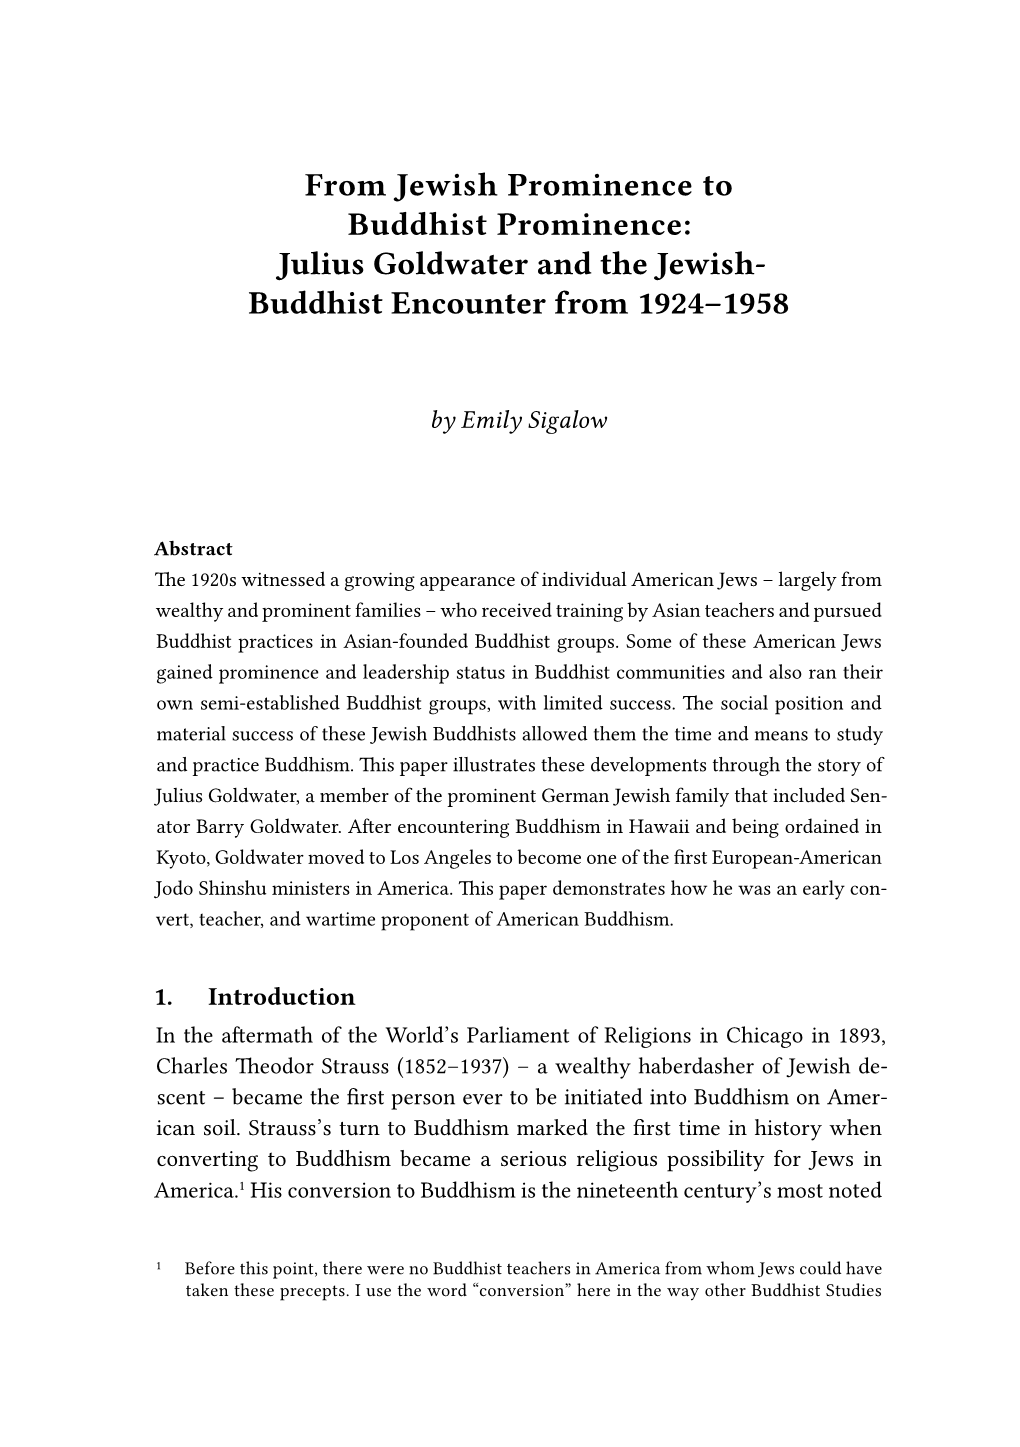 Julius Goldwater and the Jewish-Buddhist Encounter From